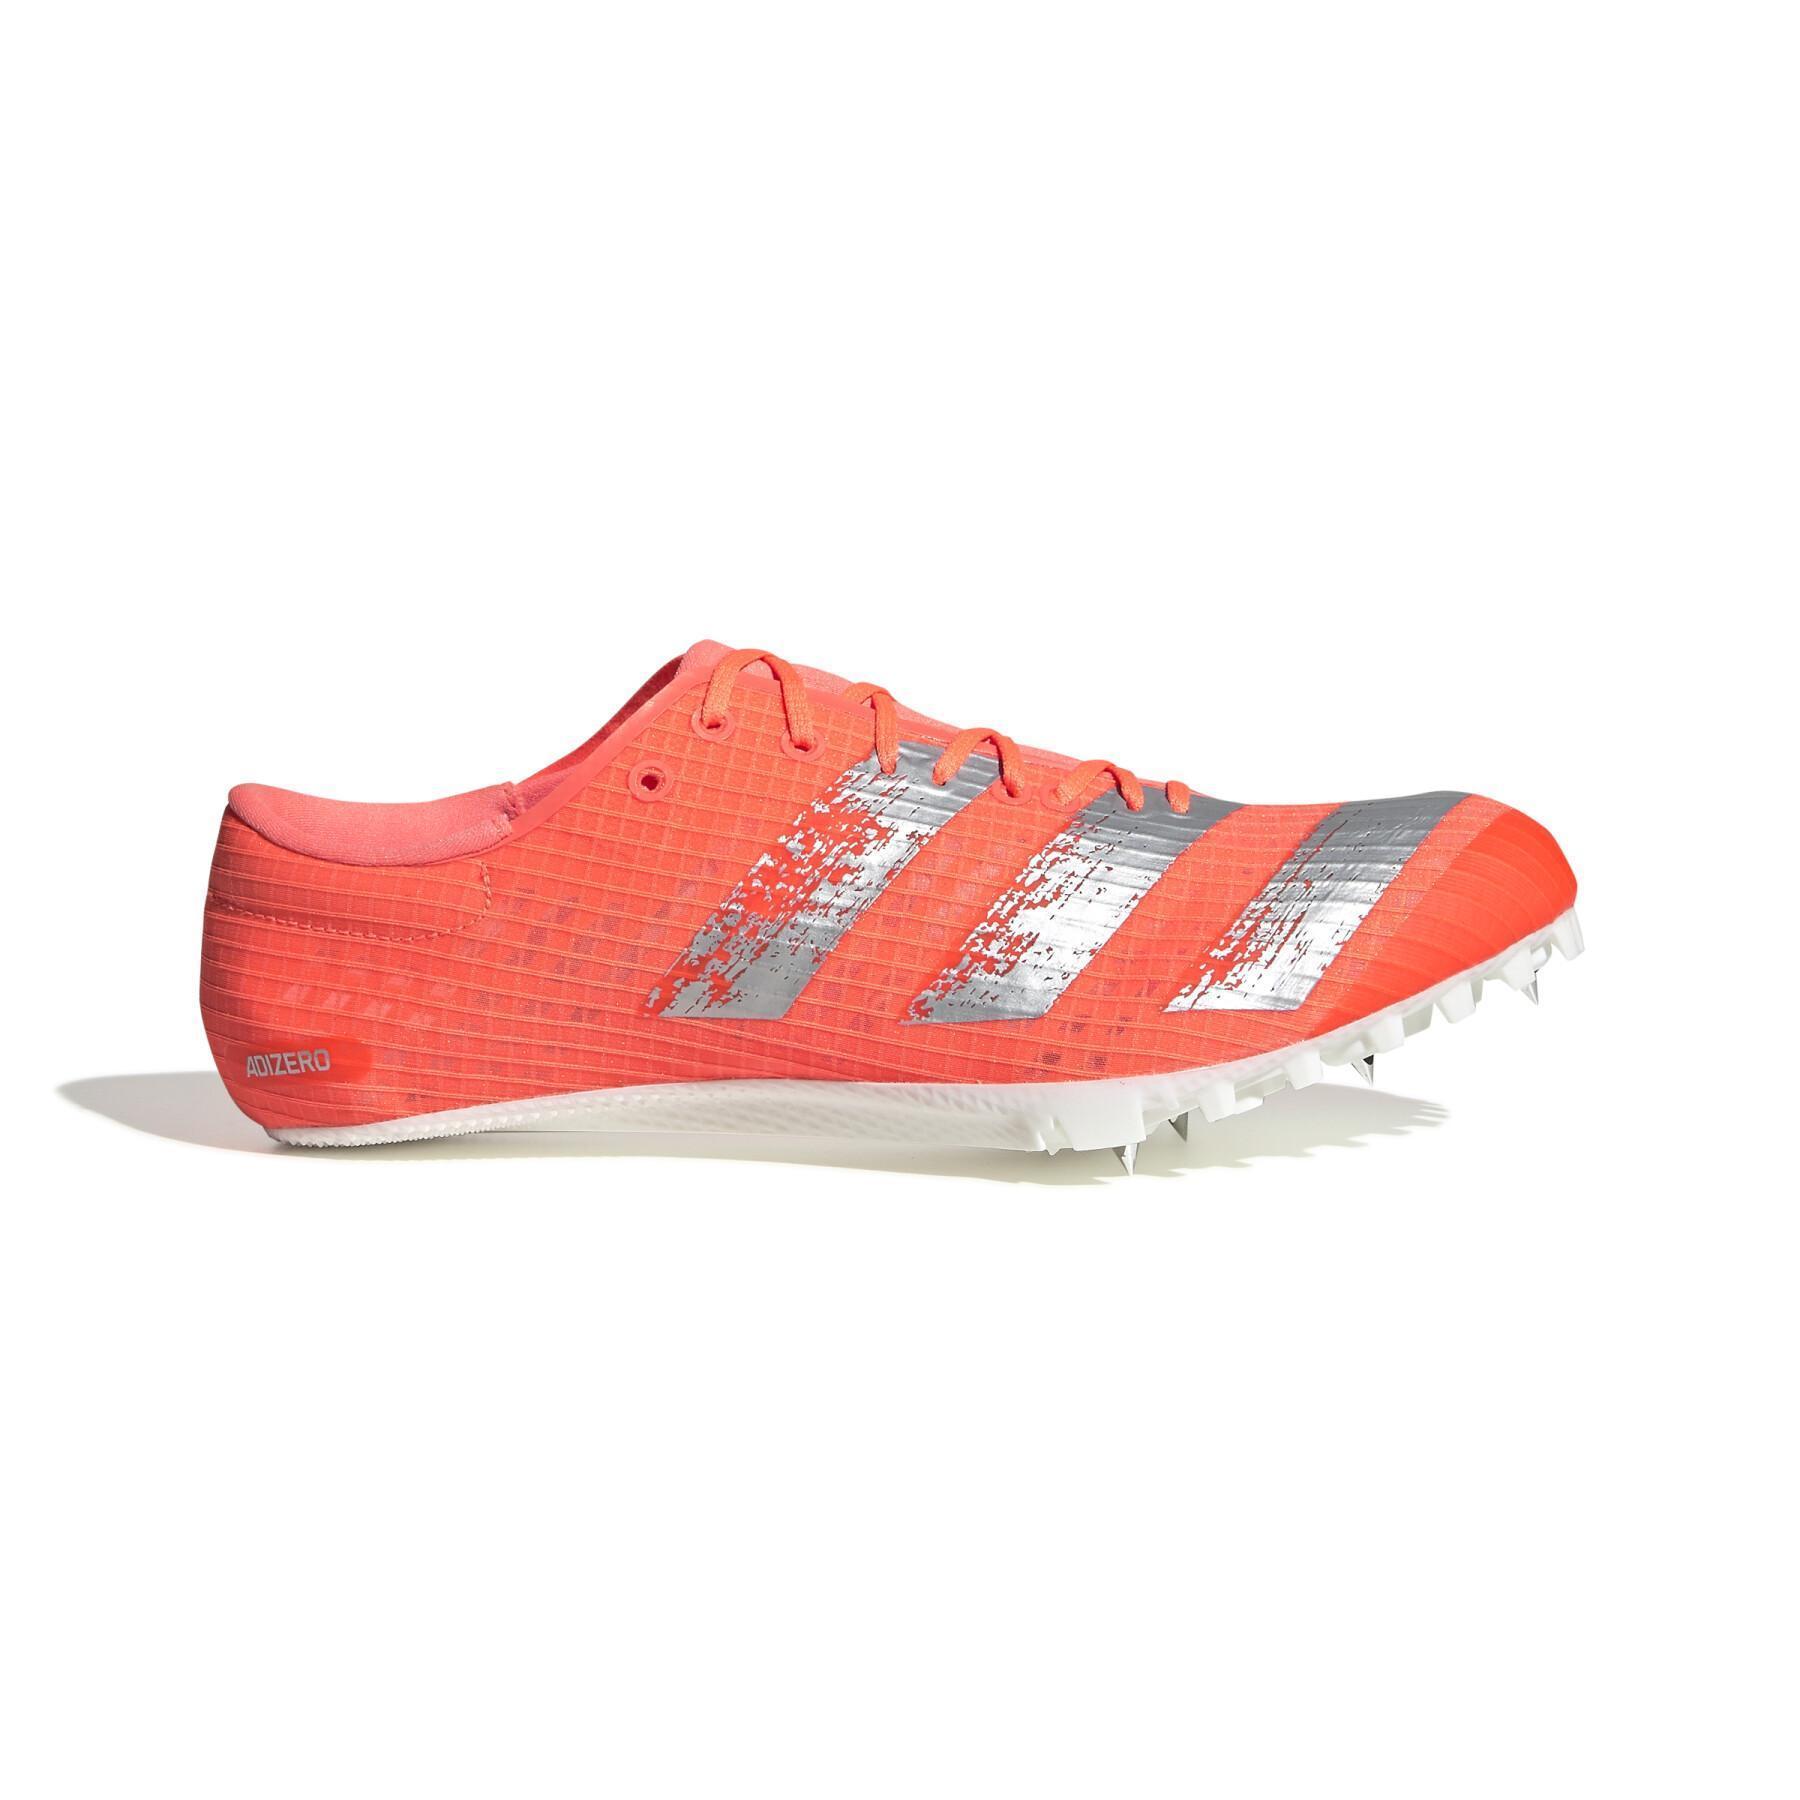 Spiked shoes adidas Adizero Finesse